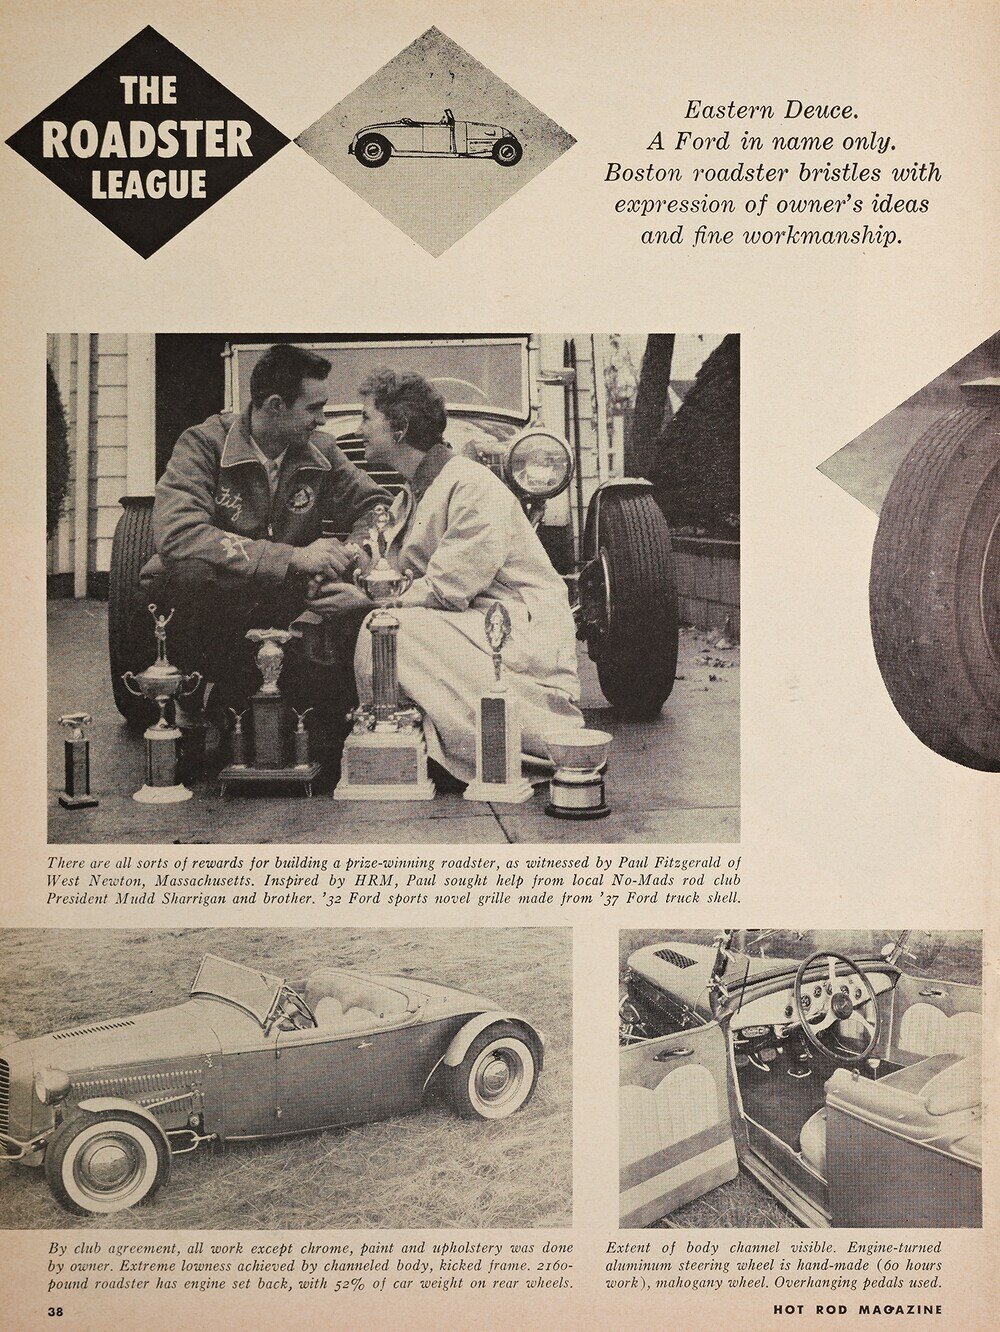 002-fitzgerald-1932-ford-roadster-hrm-layout-left-page.jpg